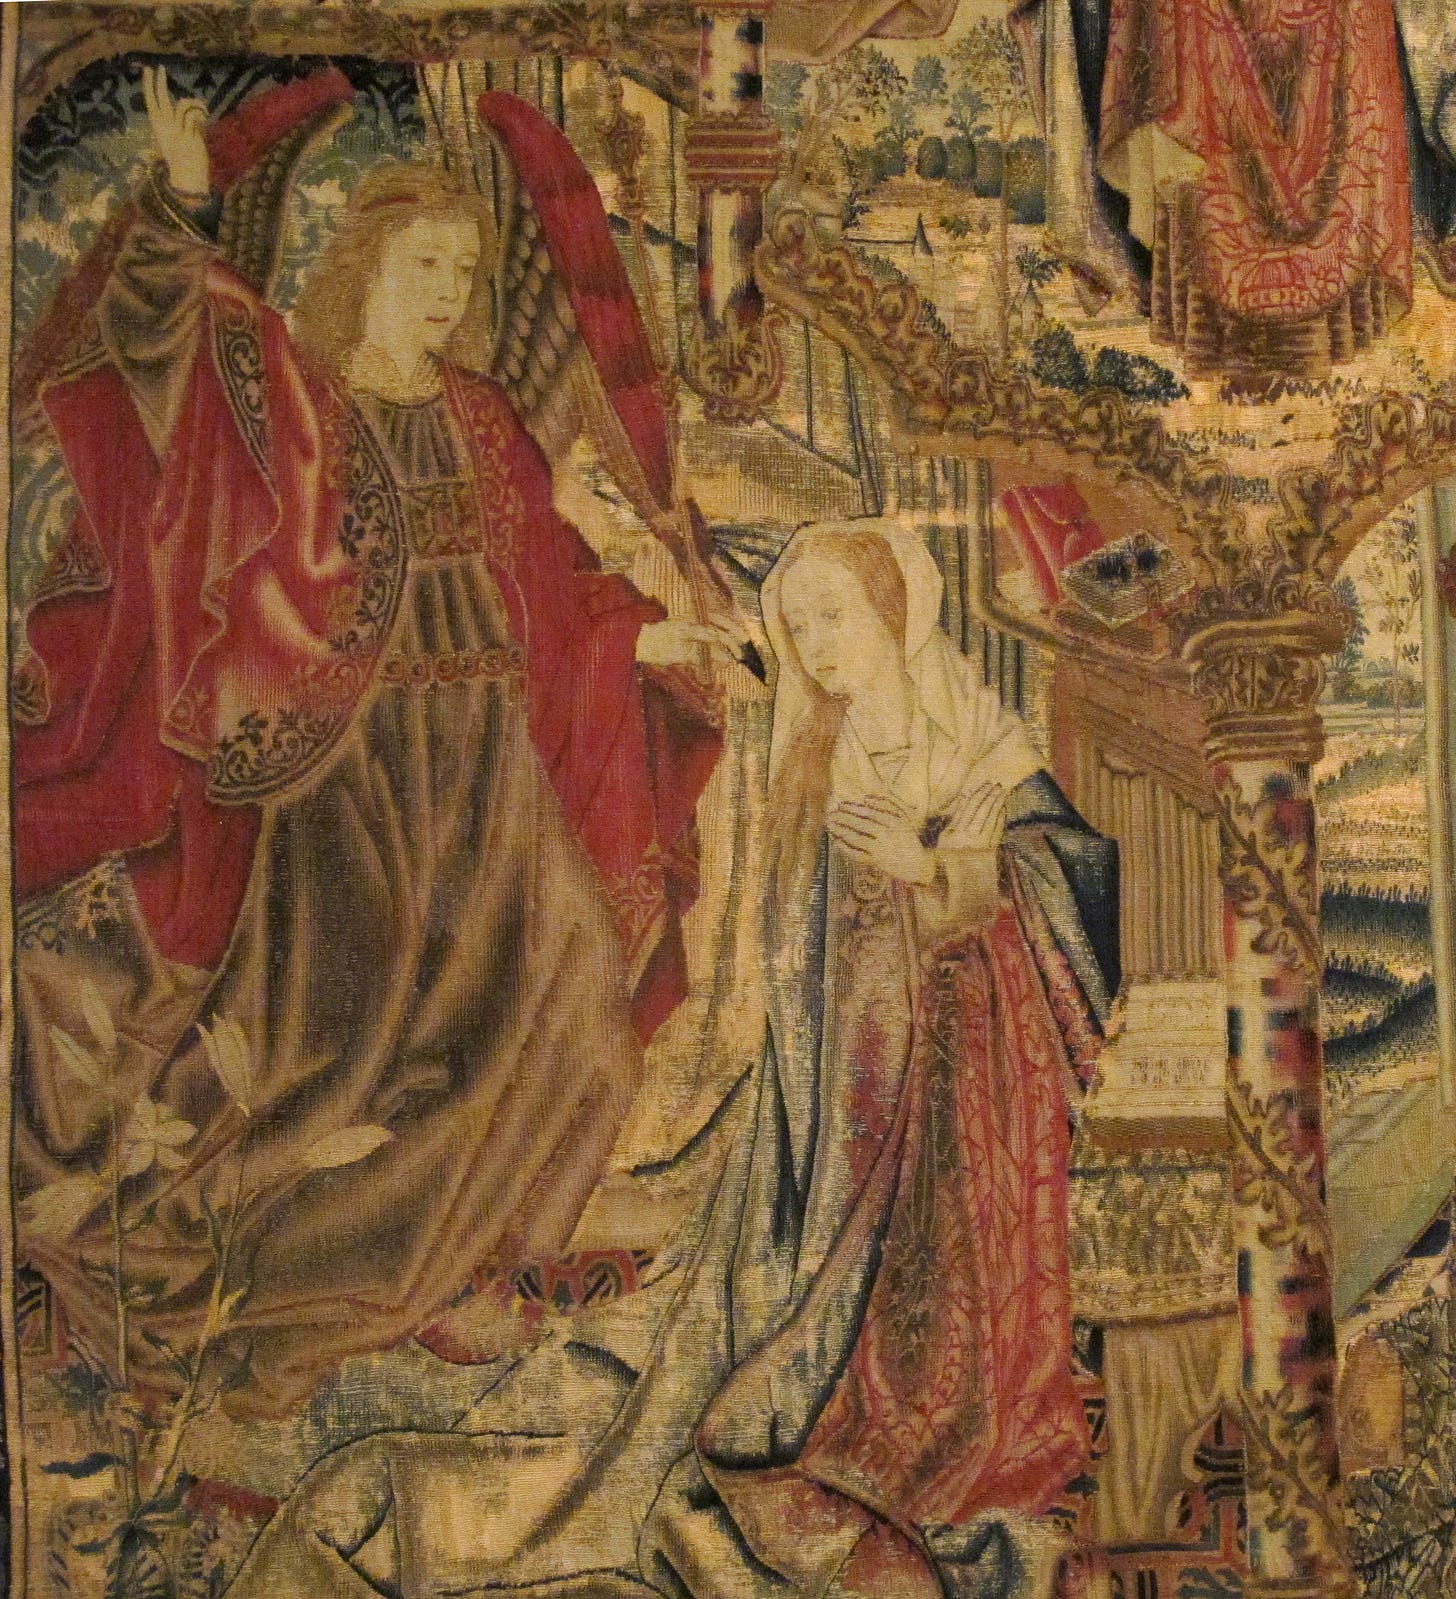 Scenes from the Life of the Virgin, Wool warp, wool, silk, and metallic wefts, South Netherlandish